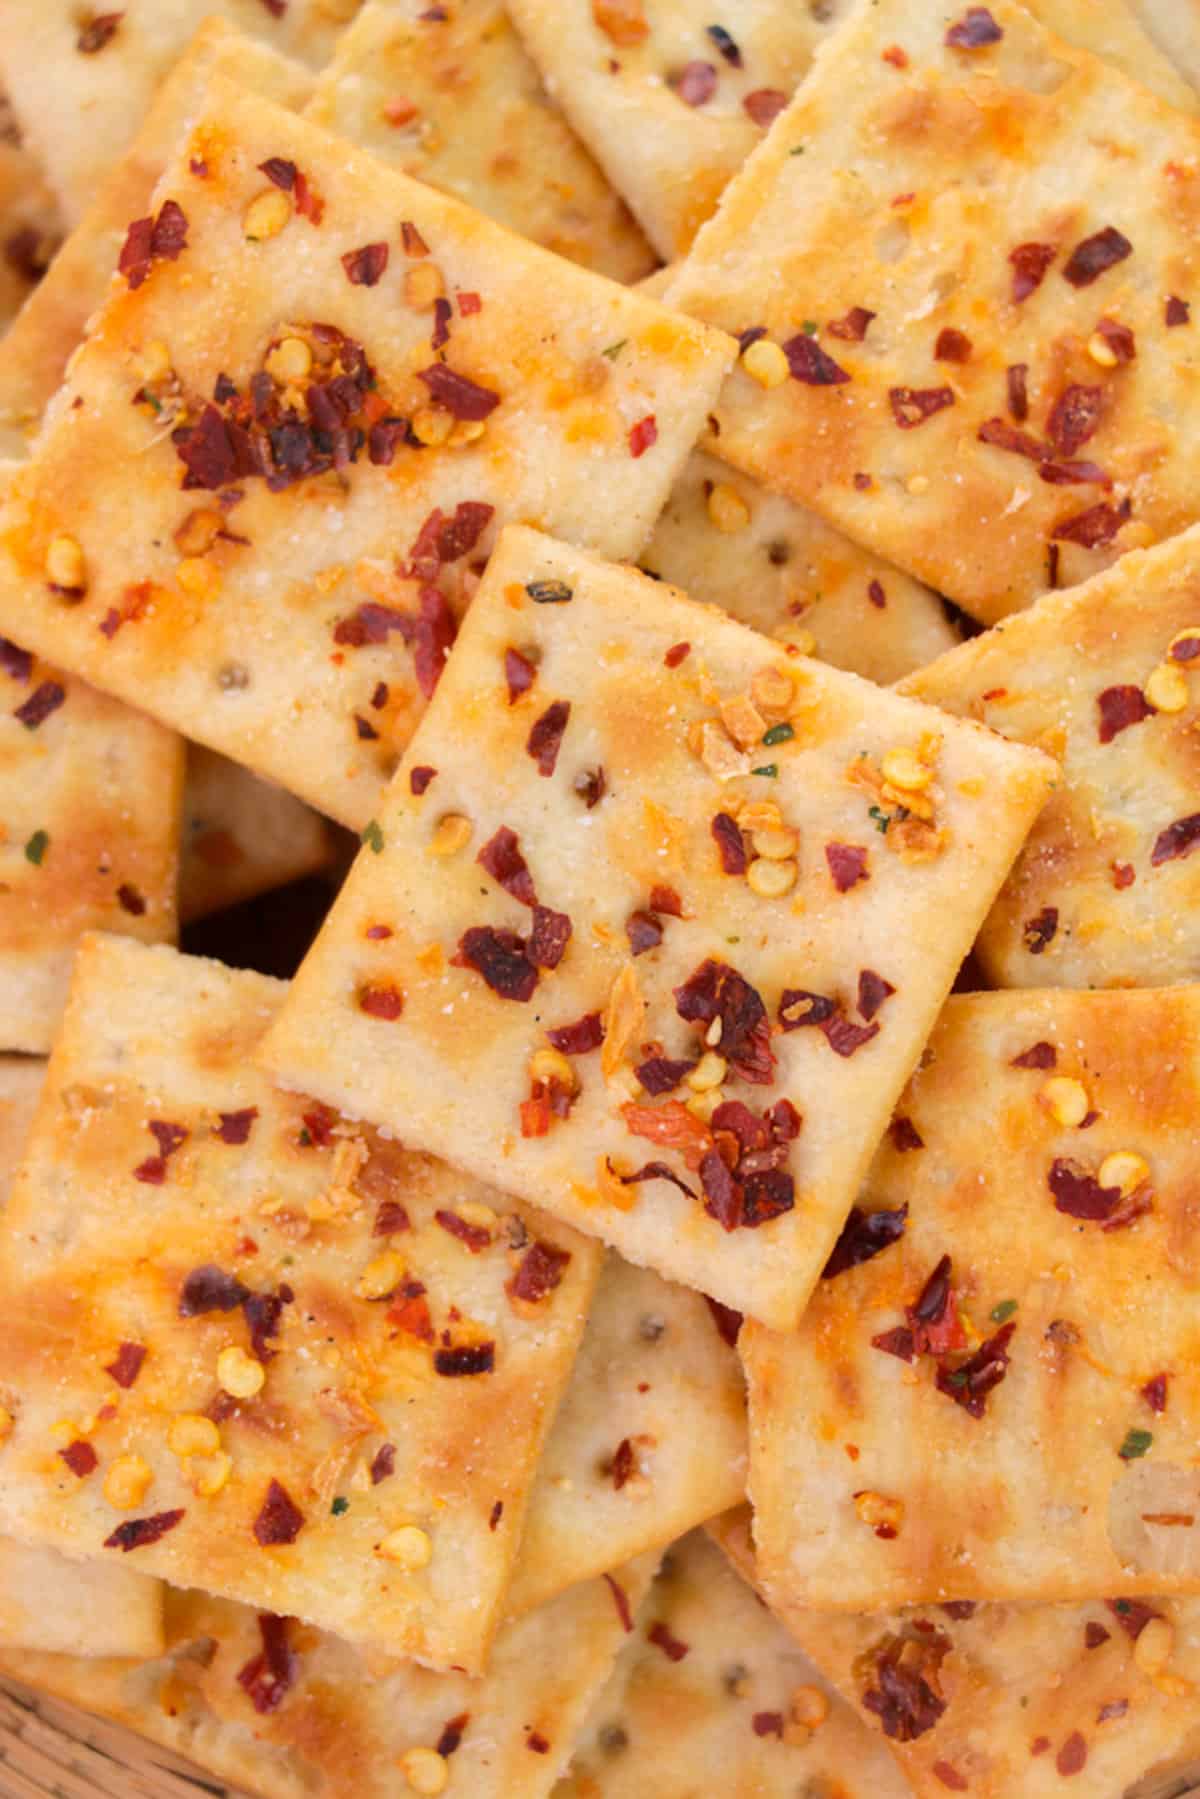 Alabama fire crackers with saltines and red pepper flakes.